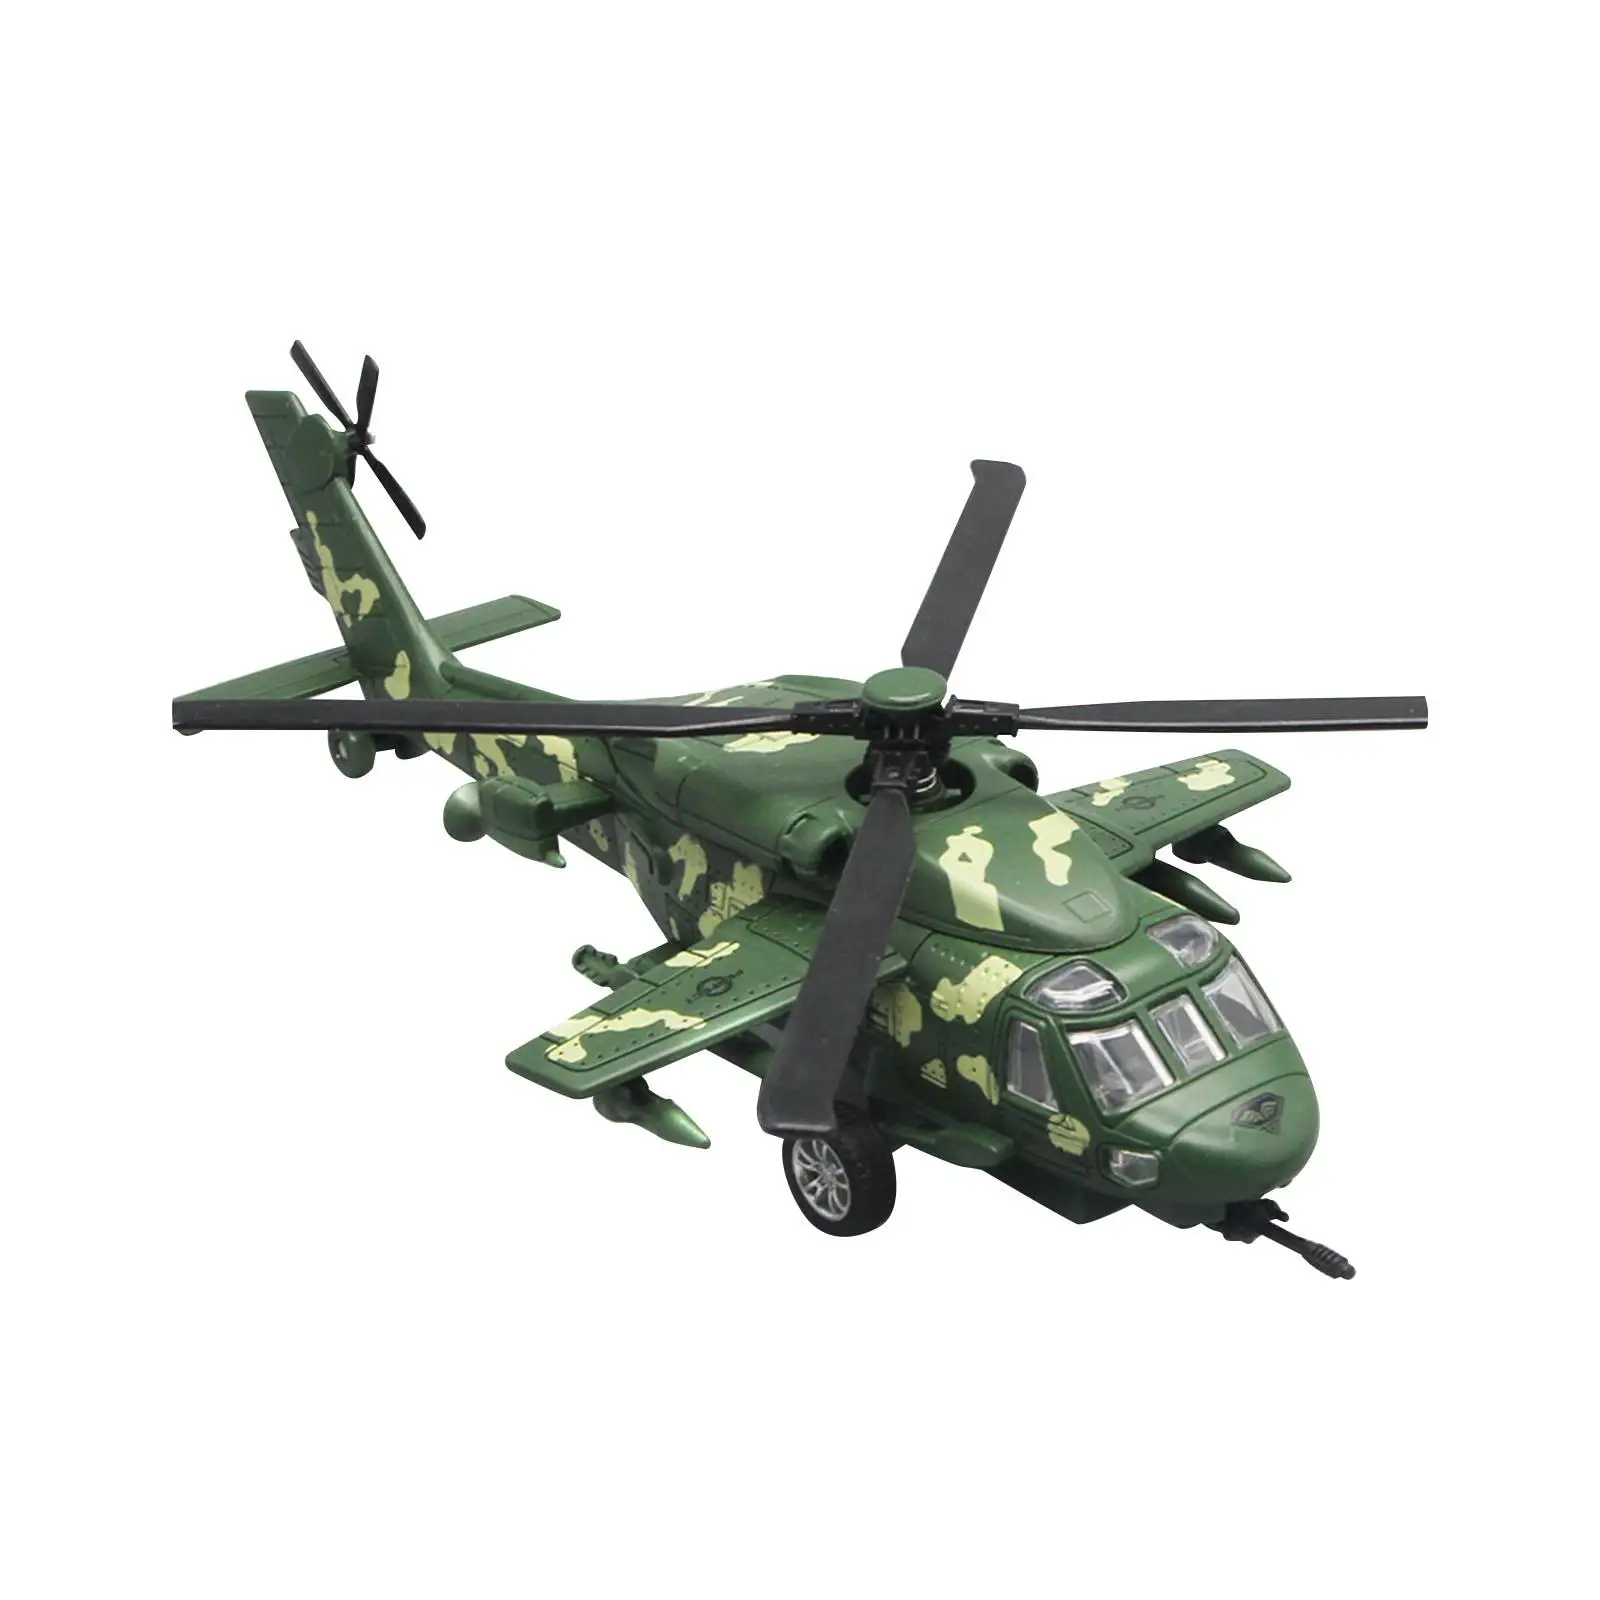 Diecast Helicopter Frication Powered Aircraft Collectables Simulation Crafts Miniature Model Tabletop Decoration Birthday Gifts